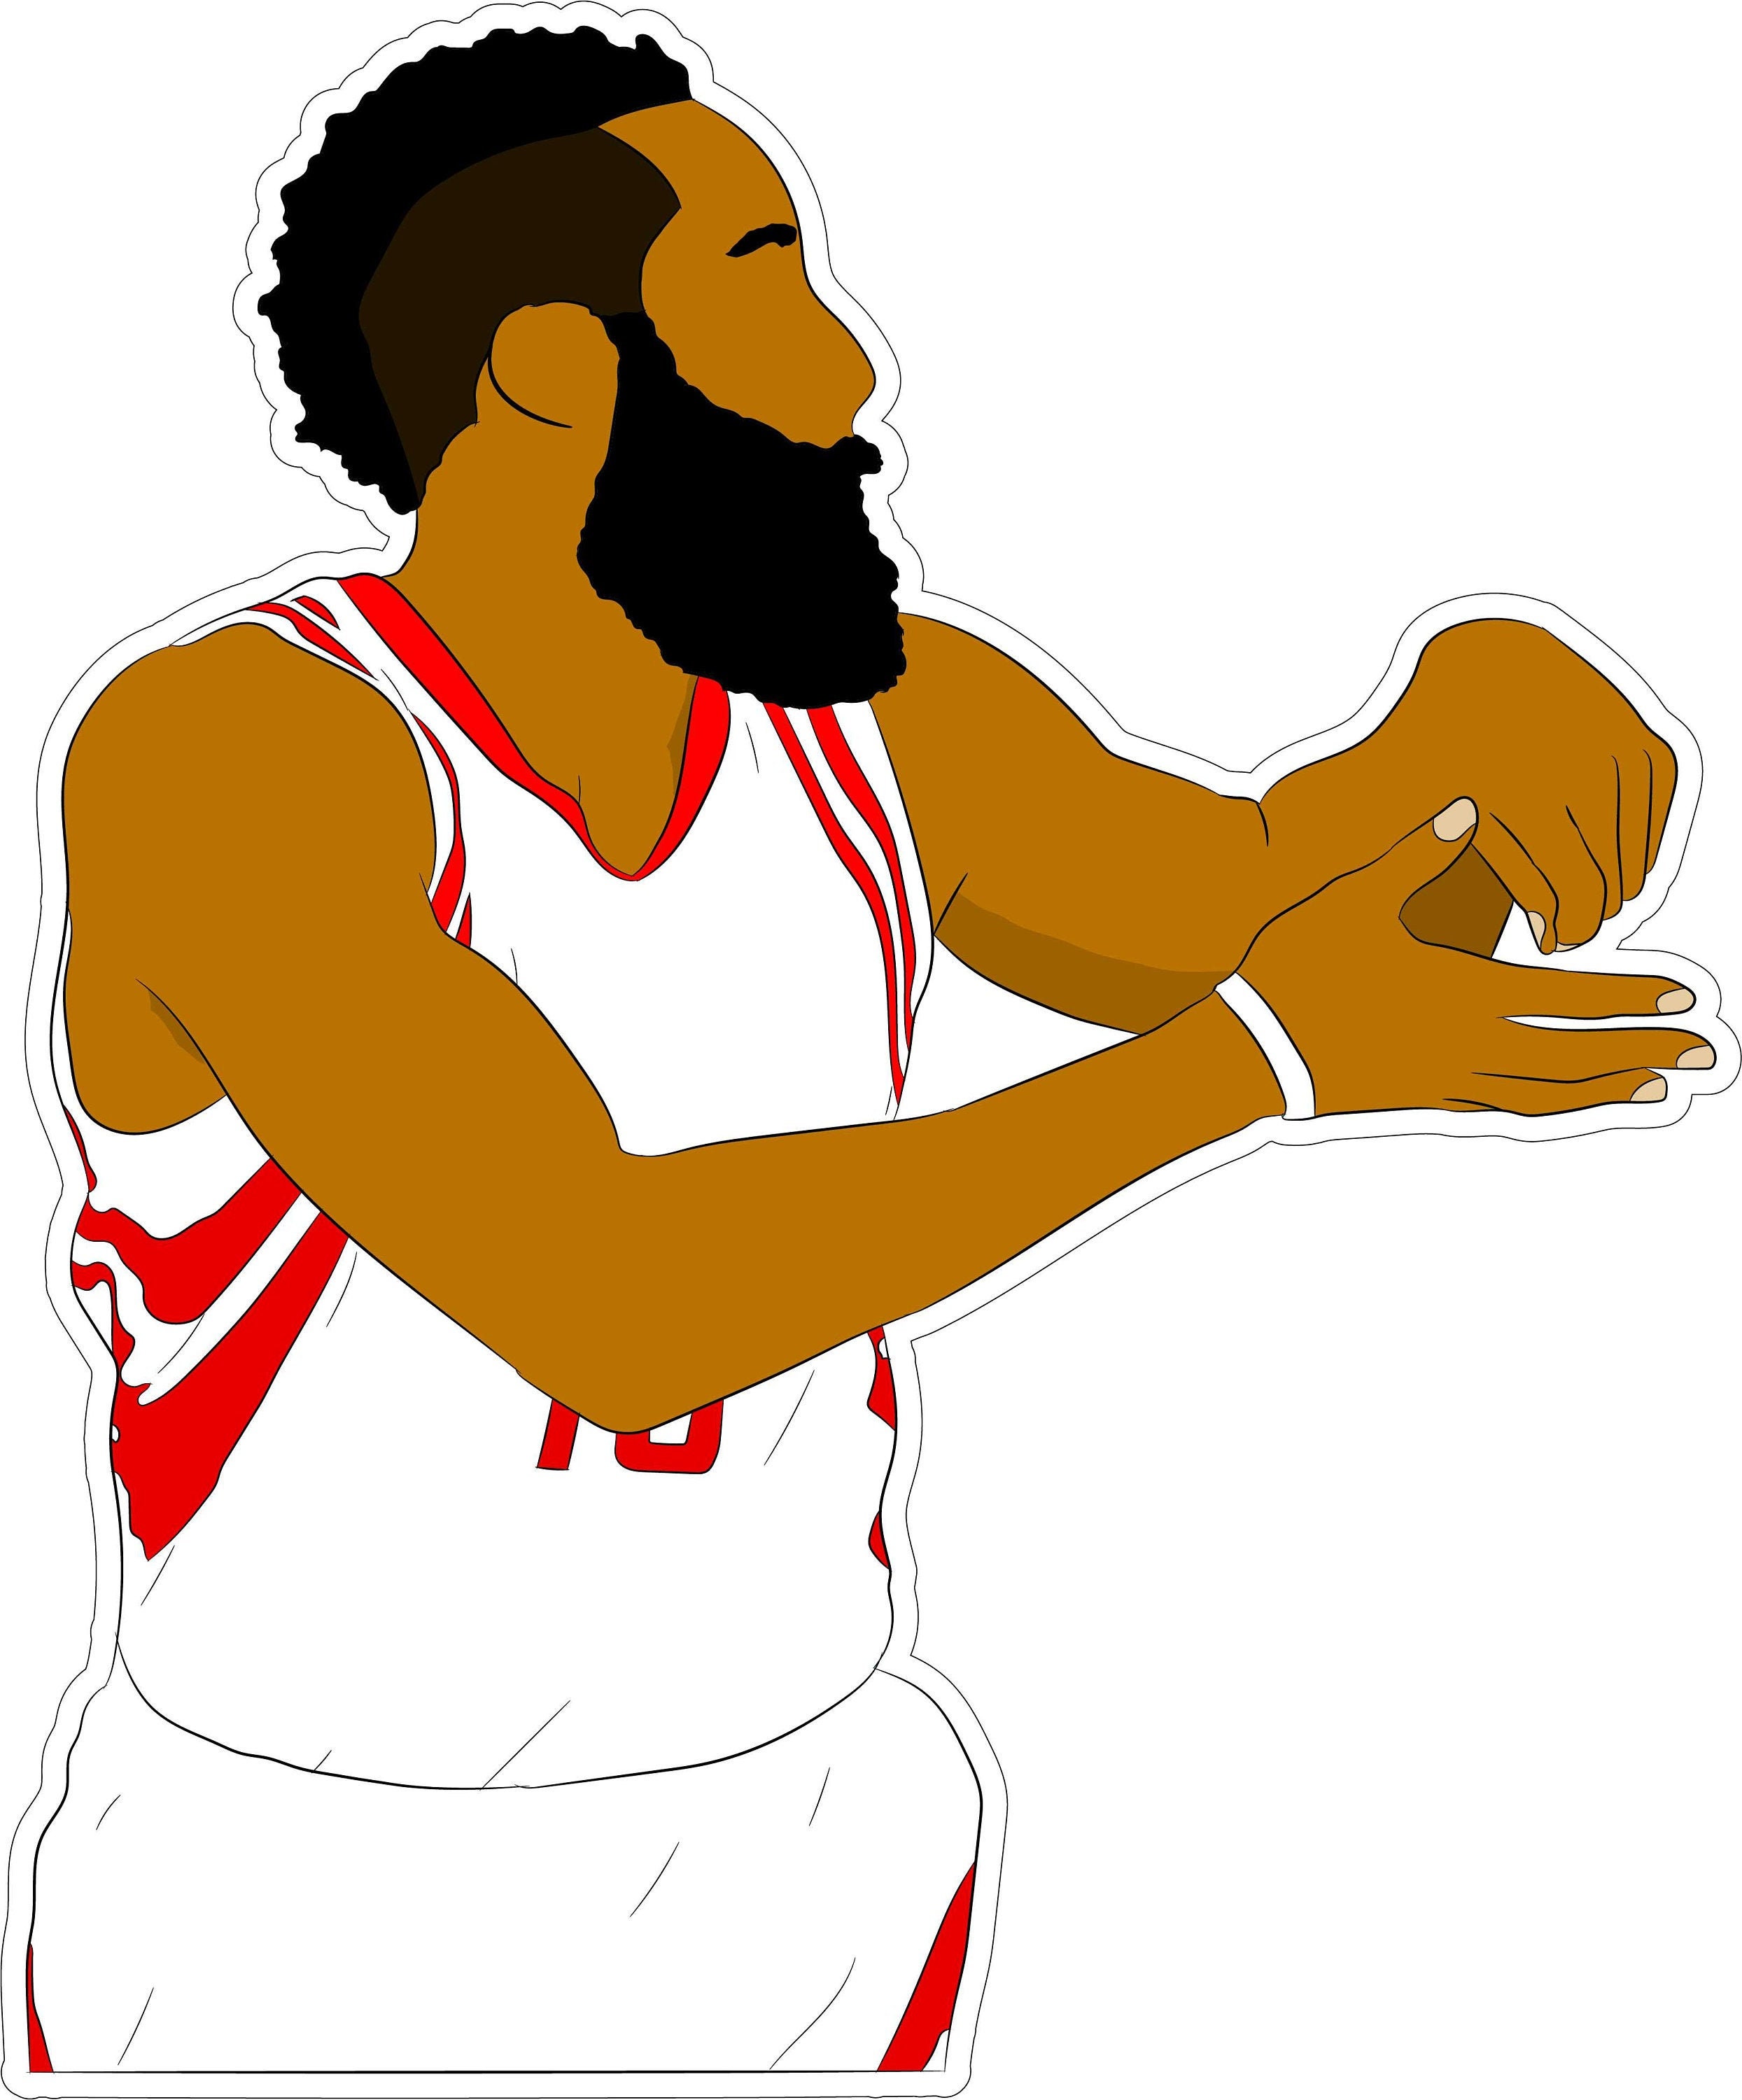 James Harden Stickers for Sale